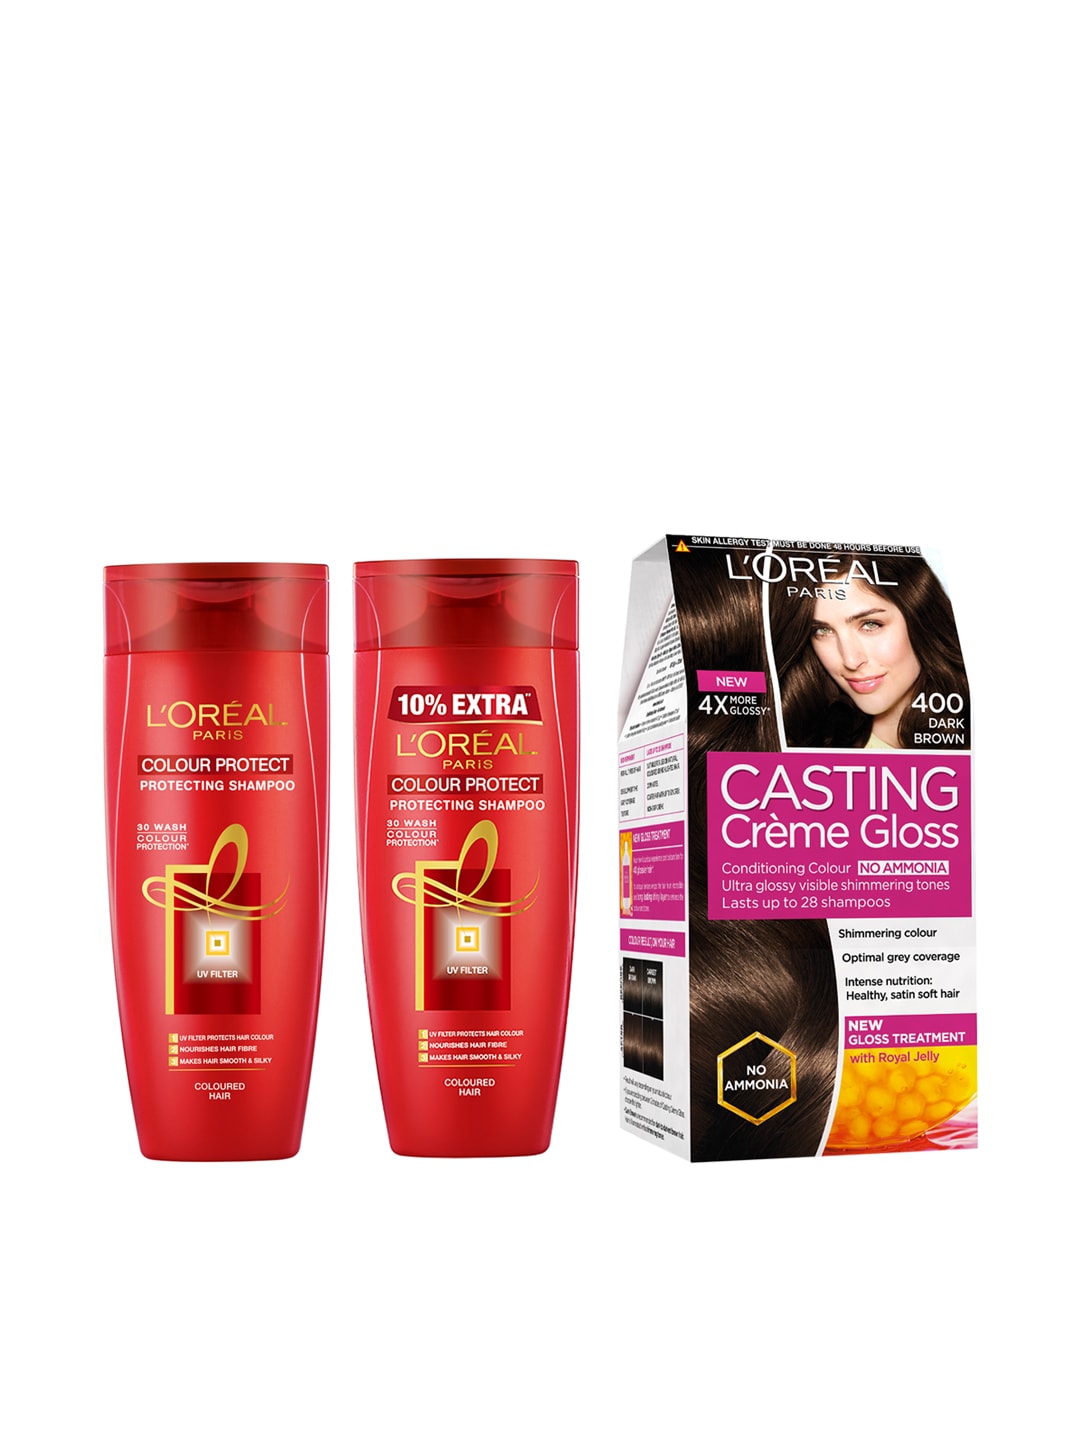 LOreal Paris Set Of 2 Colour Protect Shampoo & Dark Brown 400 Casting Gloss Hair Colour Price in India